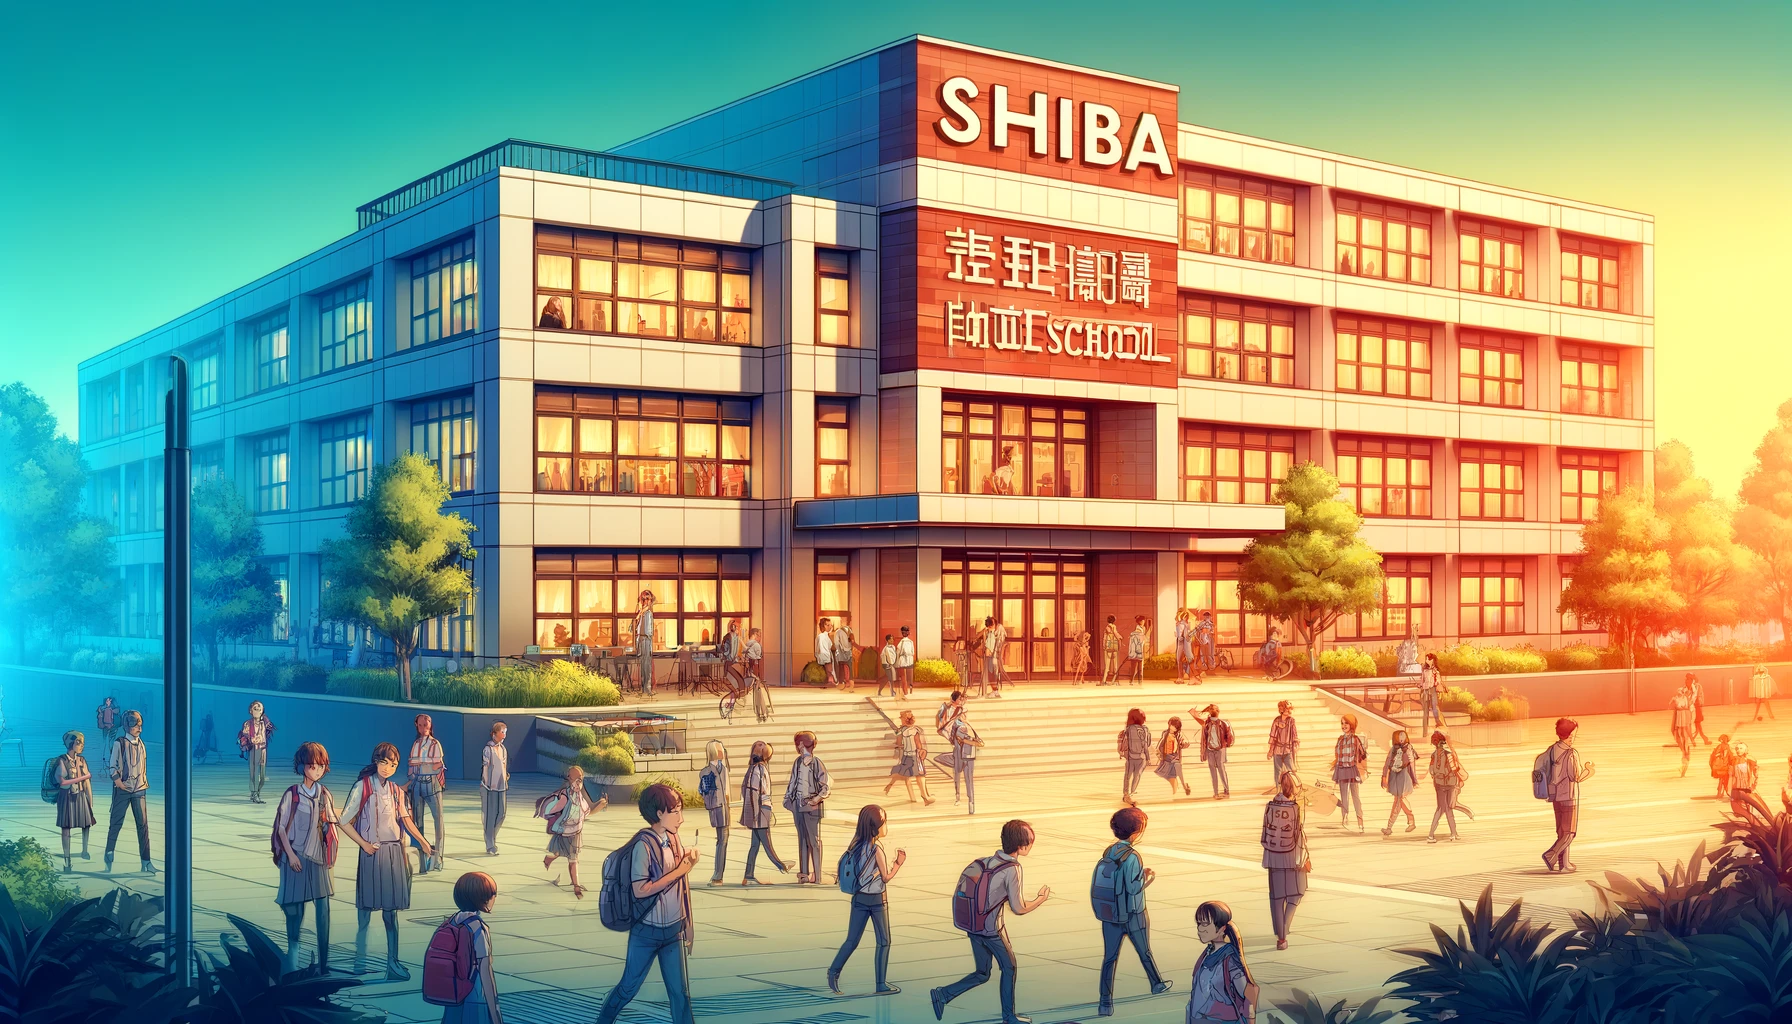 A bustling middle school with the name 'SHIBA' displayed prominently on the building facade. The school is modern and vibrant, showcasing diverse groups of students engaging in various activities like chatting, studying, and playing in the courtyard. The image conveys a sense of popularity and liveliness, ideal for representing the theme of the school's appeal.